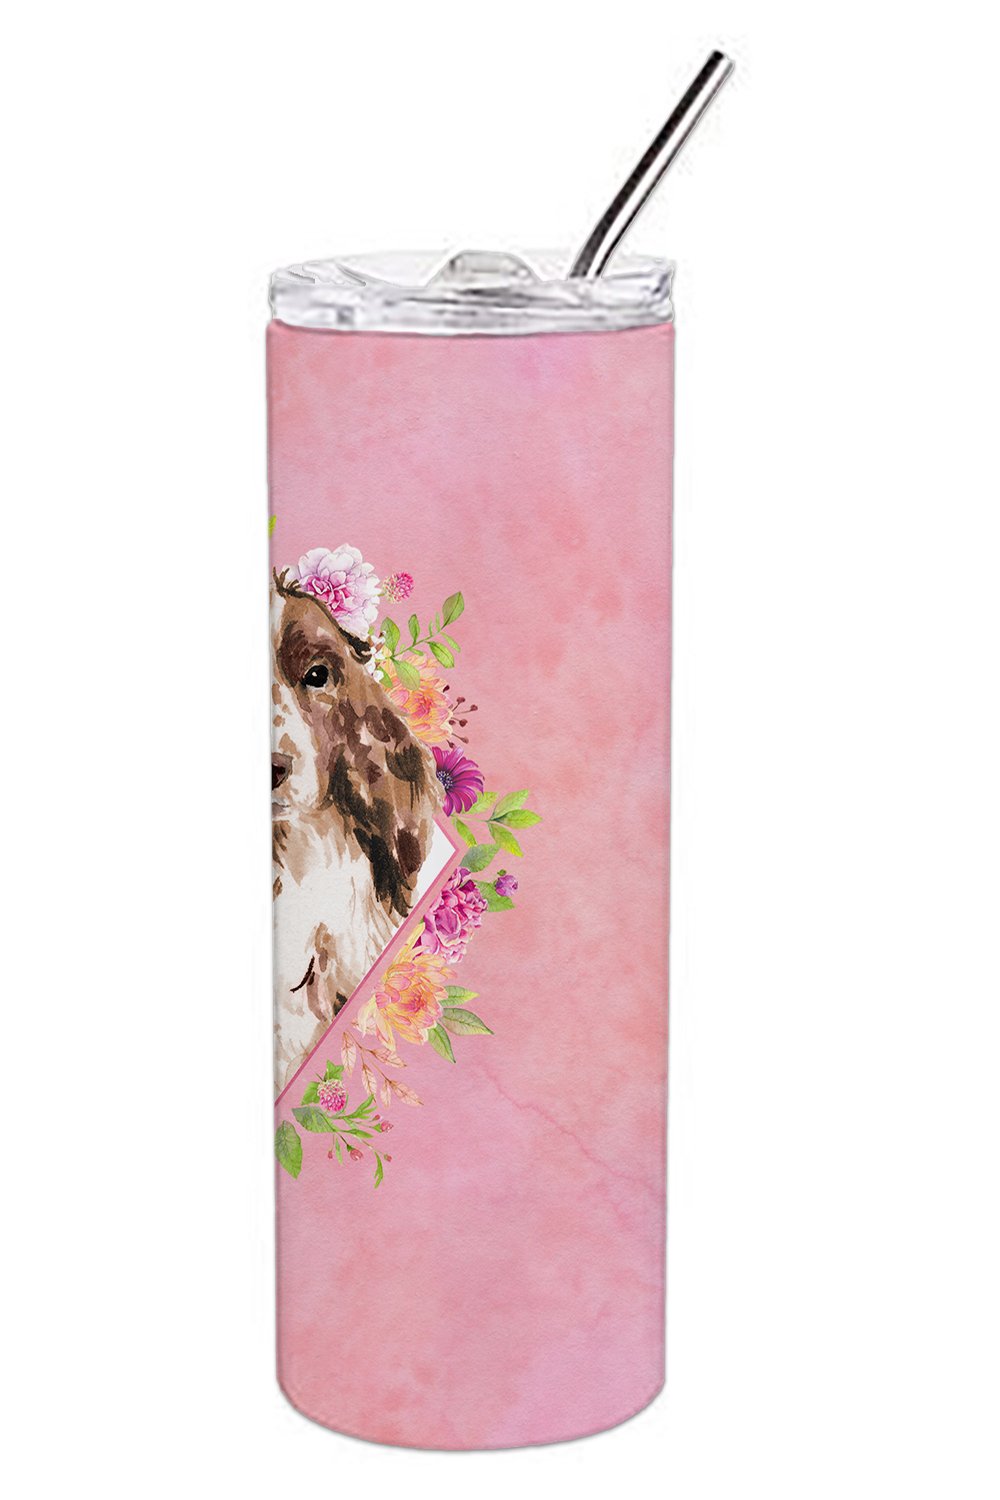 Brown Parti Cocker Spaniel Pink Flowers Double Walled Stainless Steel 20 oz Skinny Tumbler CK4252TBL20 by Caroline's Treasures